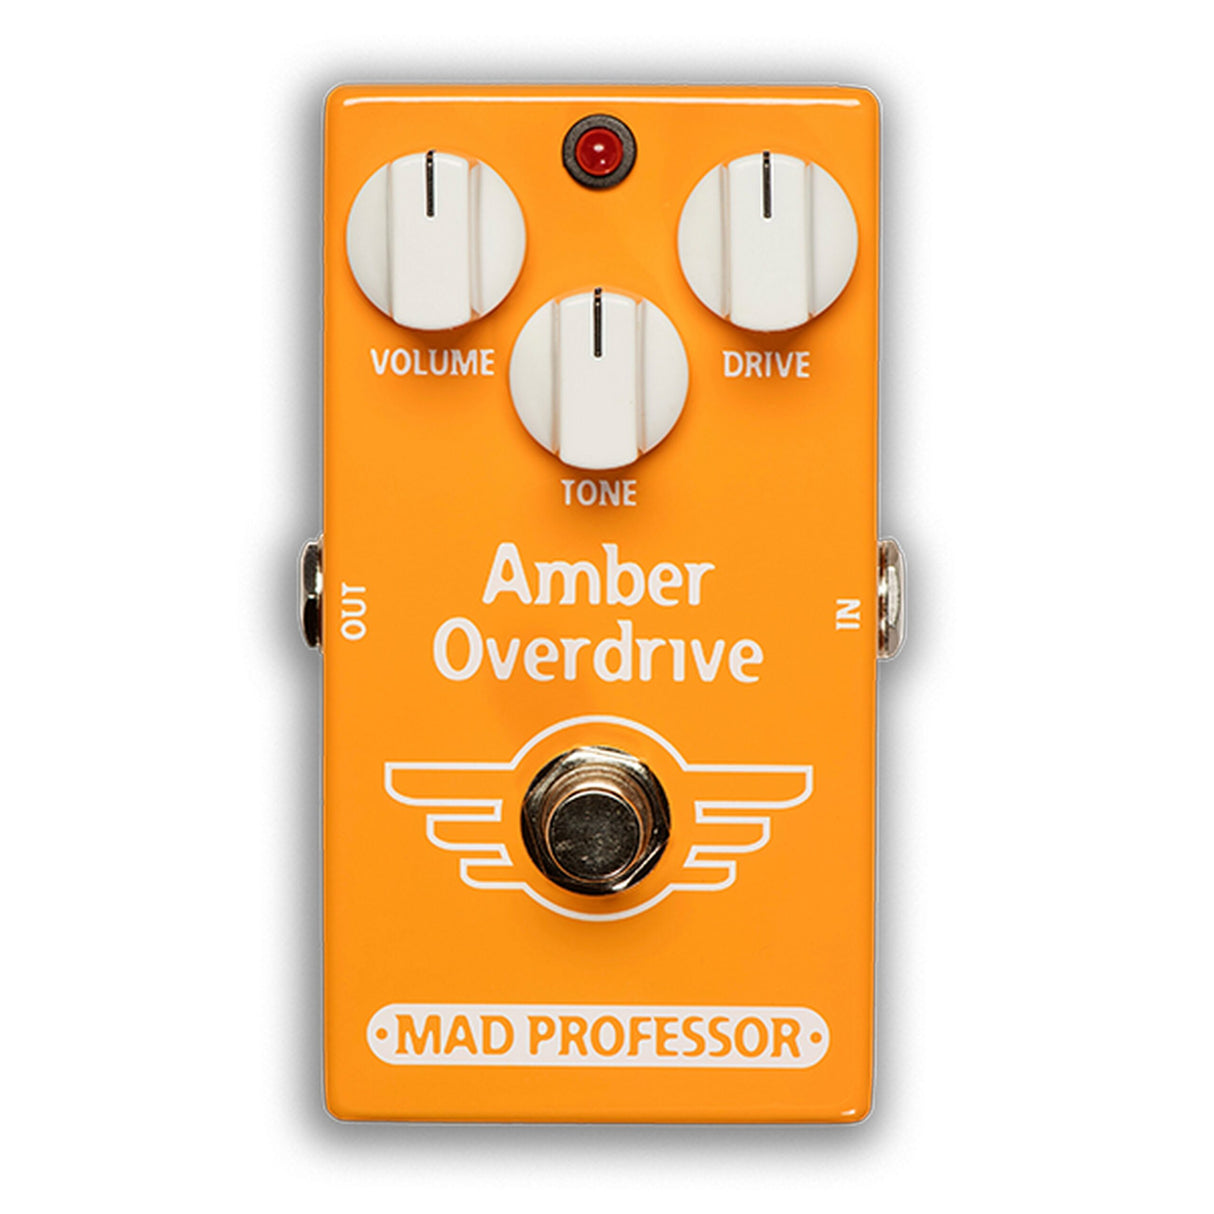 Mad Professor Amber Overdrive Guitar Pedal